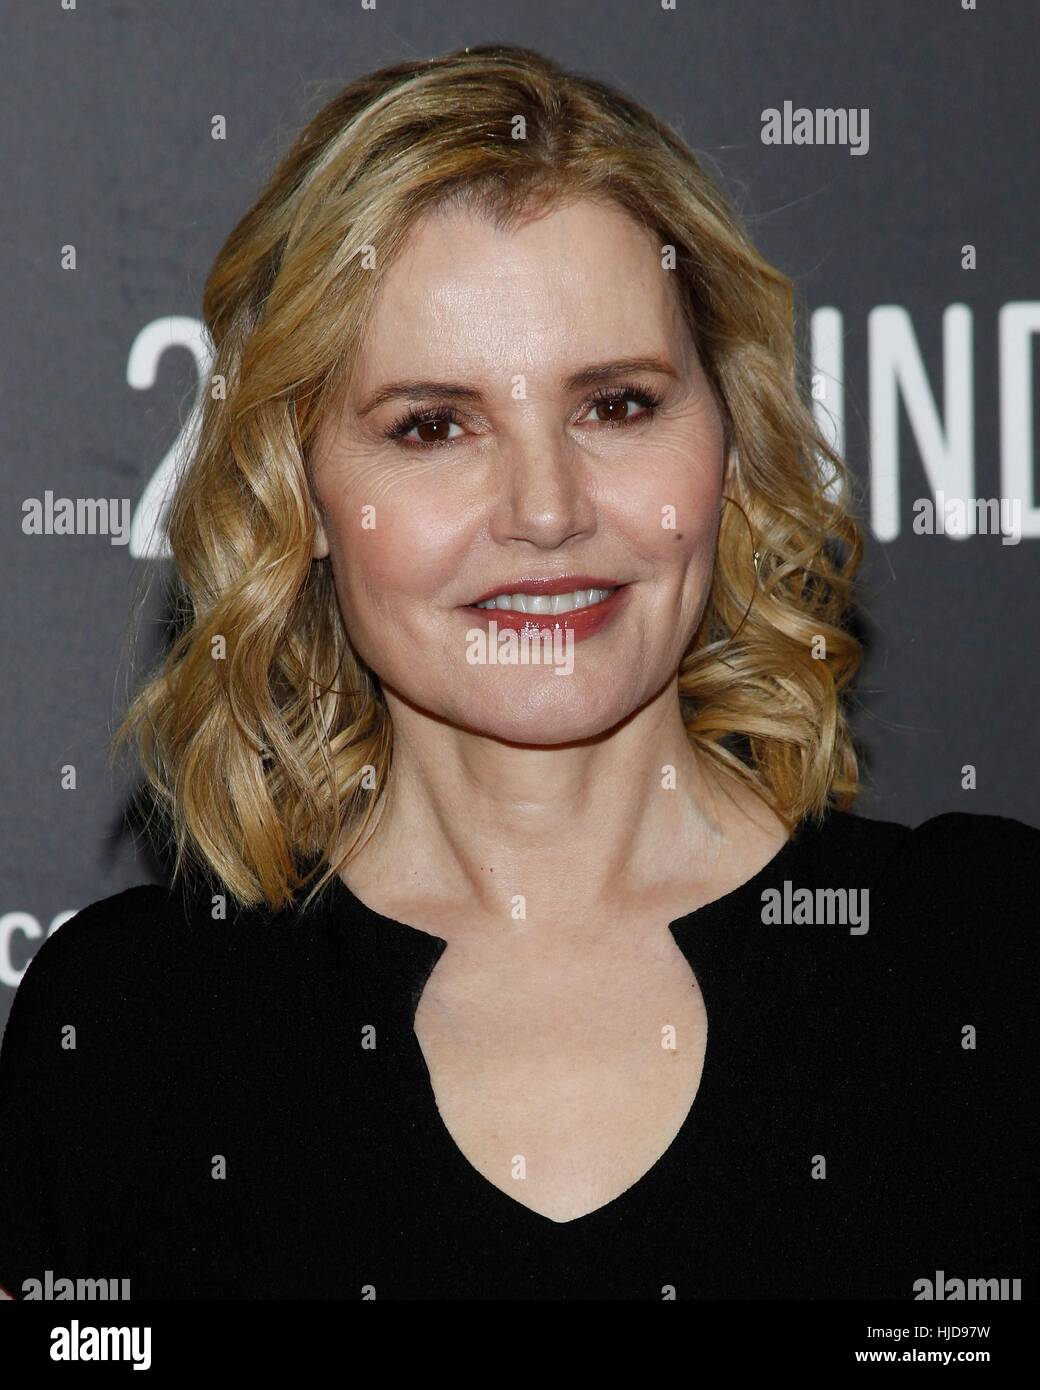 New York, NY, USA. 23rd Jan, 2017. Geena Davis at arrivals for MARJORIE PRIME Premiere at Sundance Film Festival 2017, Eccles Theatre, New York, USA. January 23, 2017. Credit: James Atoa/Everett Collection/Alamy Live News Stock Photo